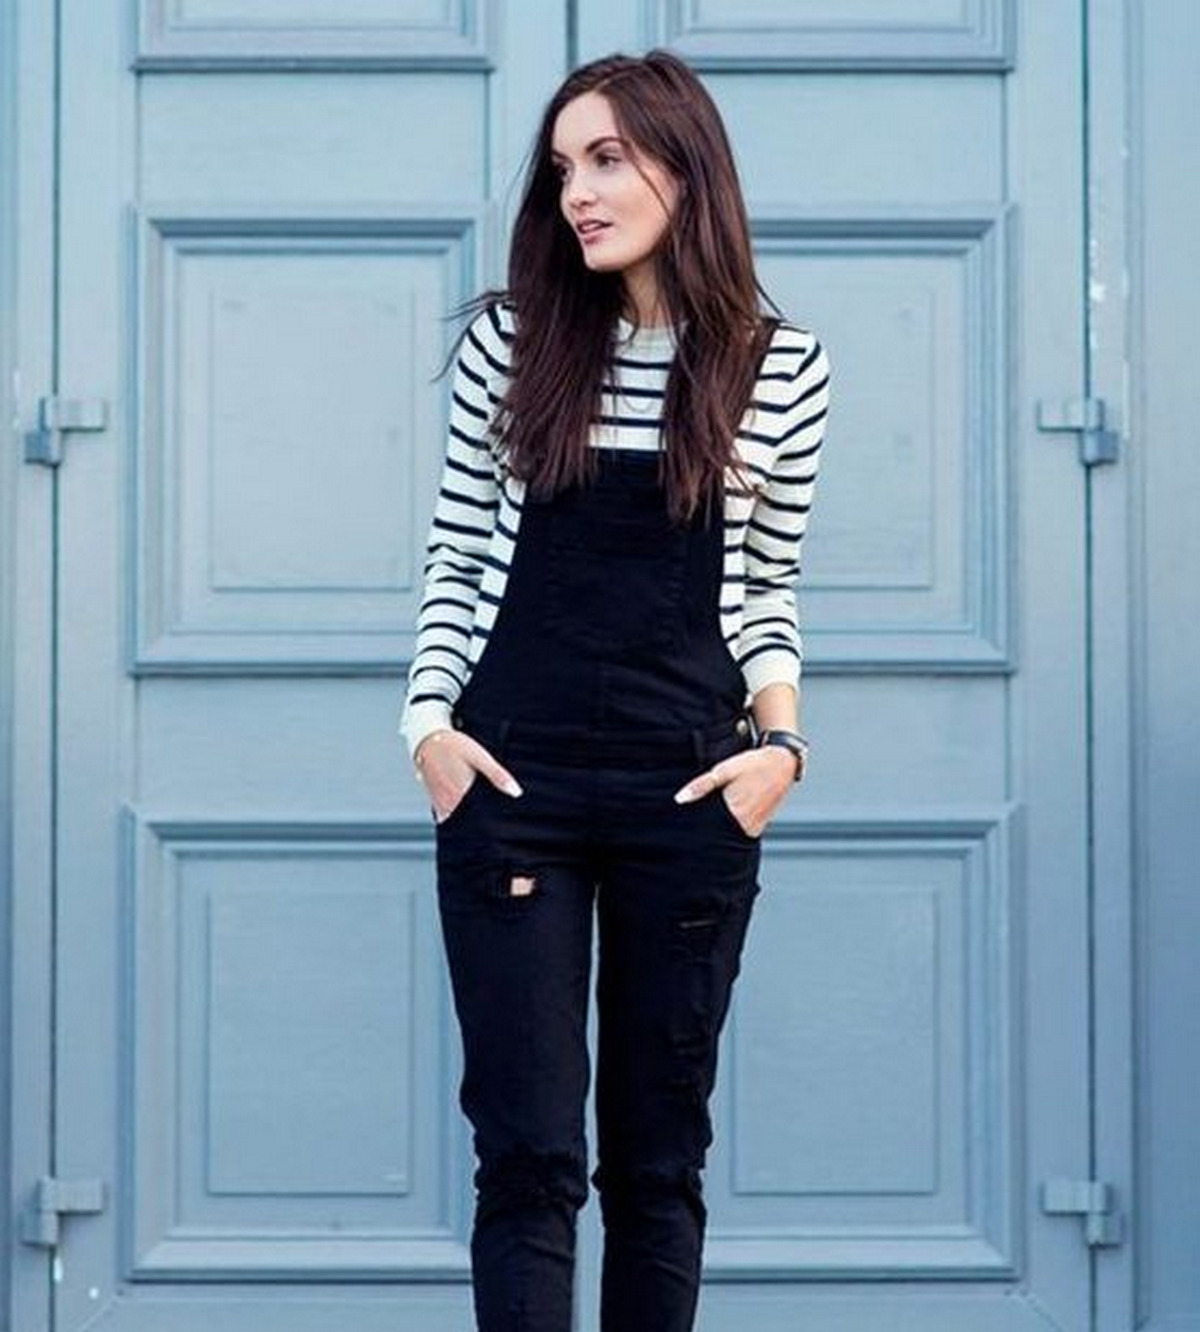 Long-Sleeve Striped T-Shirt With Black Body-Hugging Overalls